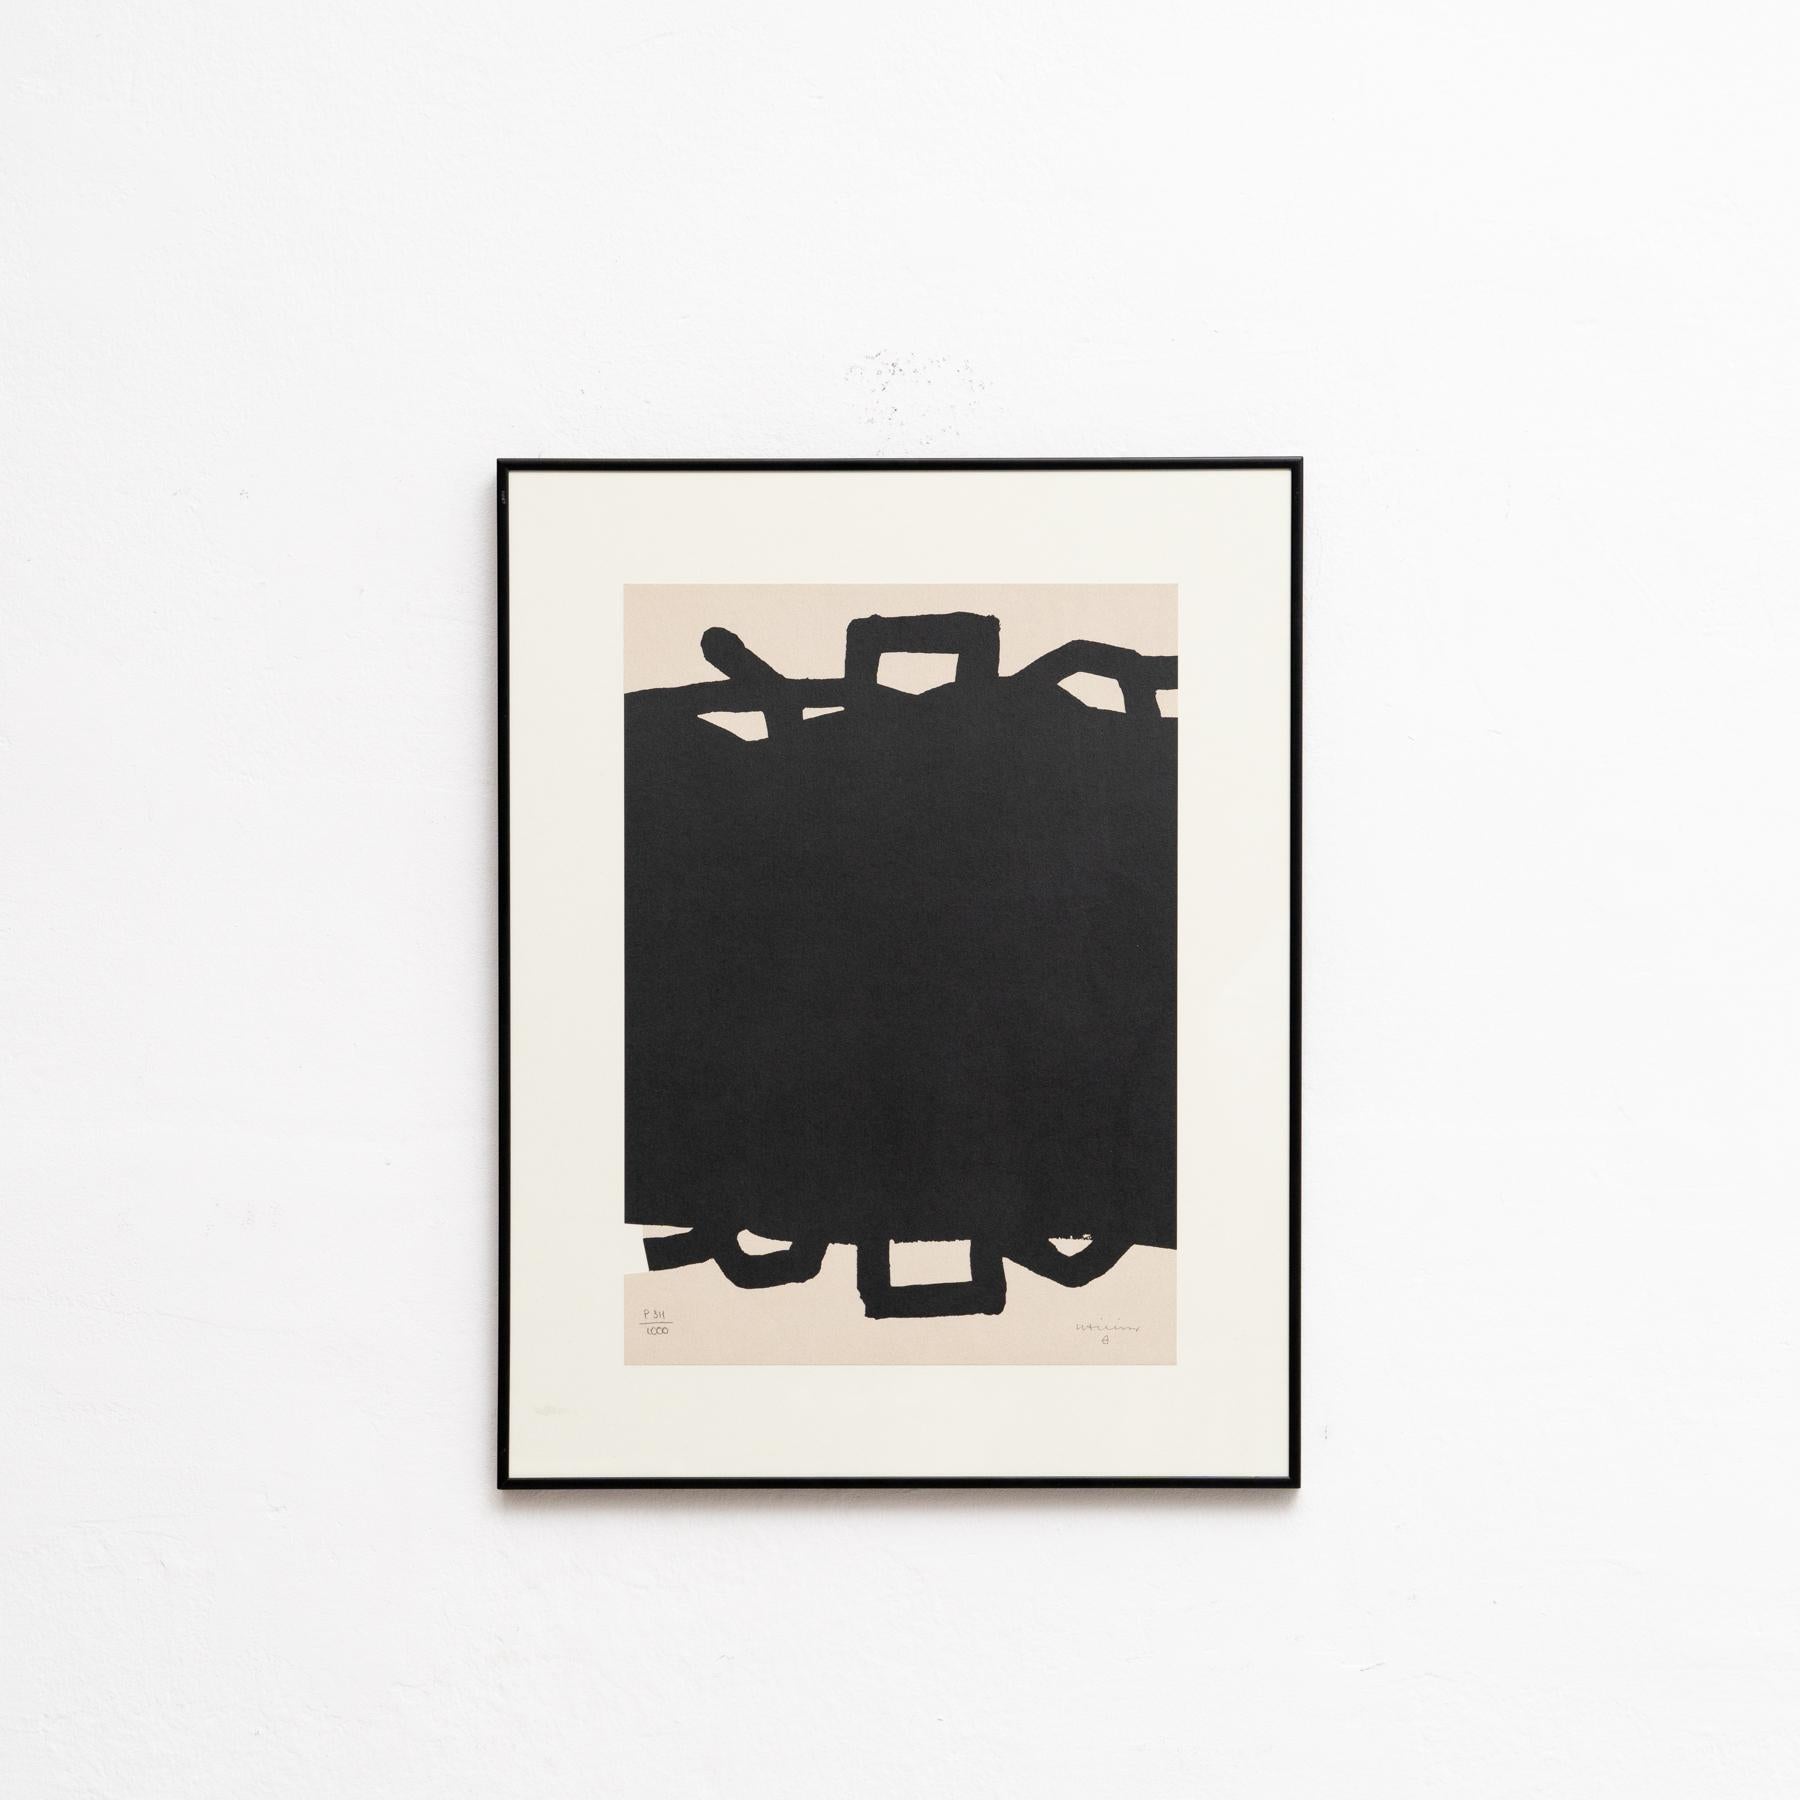 Embark on a visual journey through the abstract realm with Eduardo Chillida's mesmerizing lithography titled 